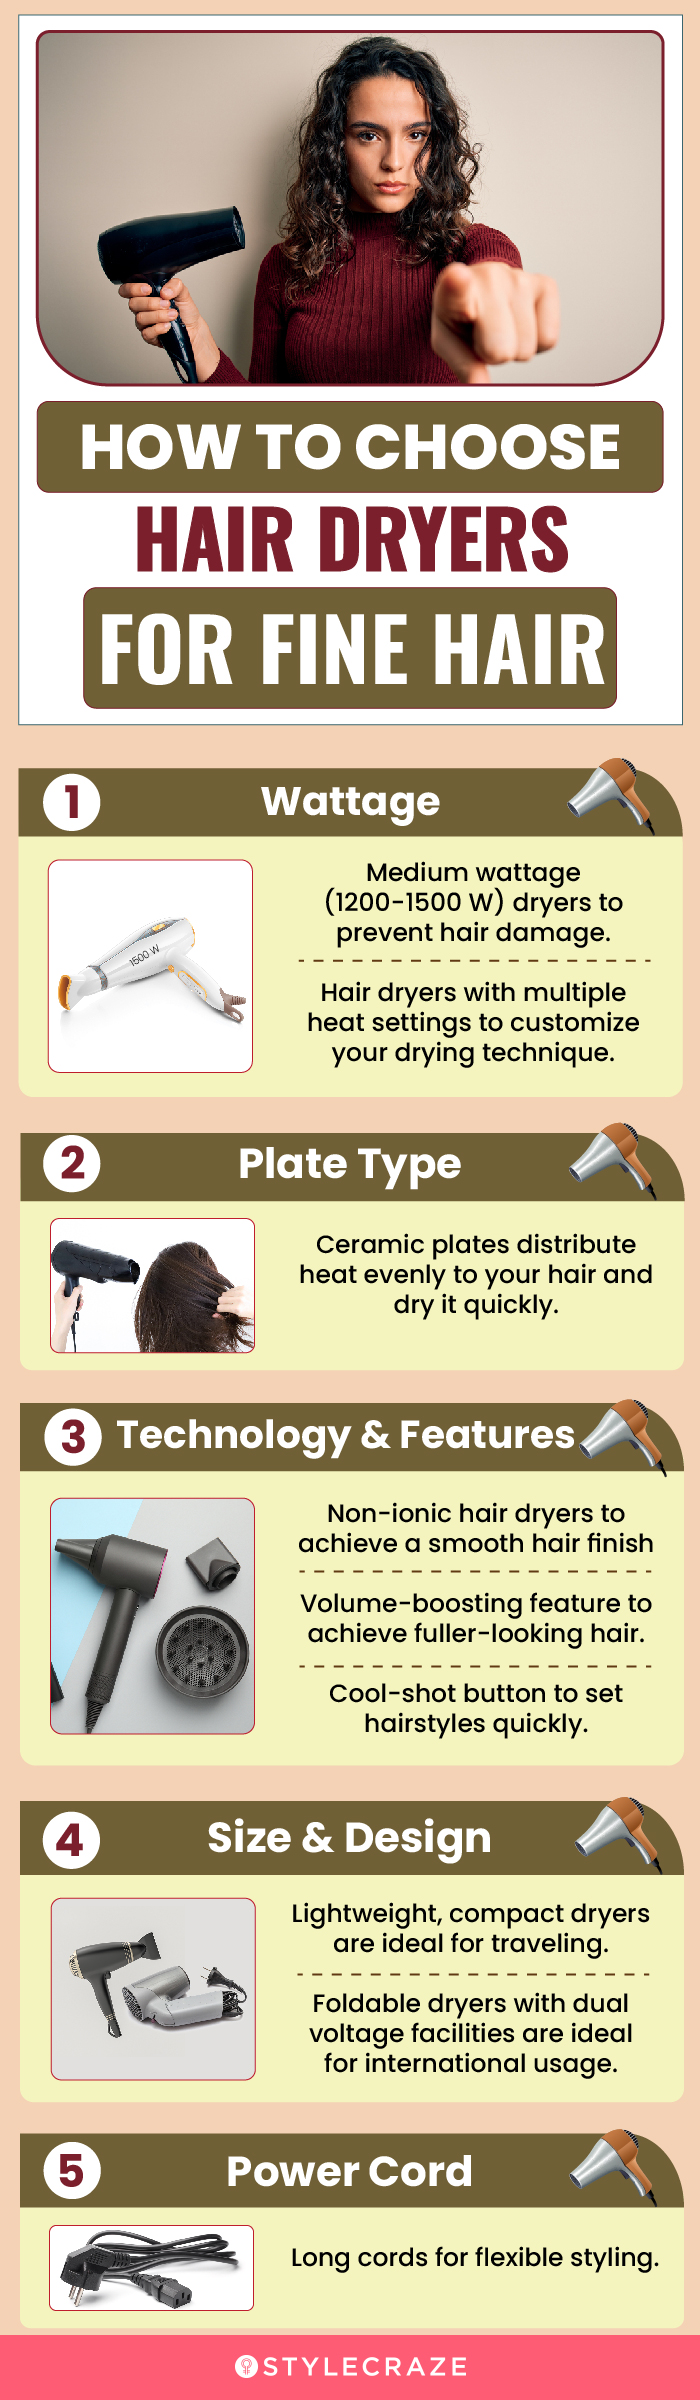 How To Choose Hair Dryers For Fine Hair (infographic)